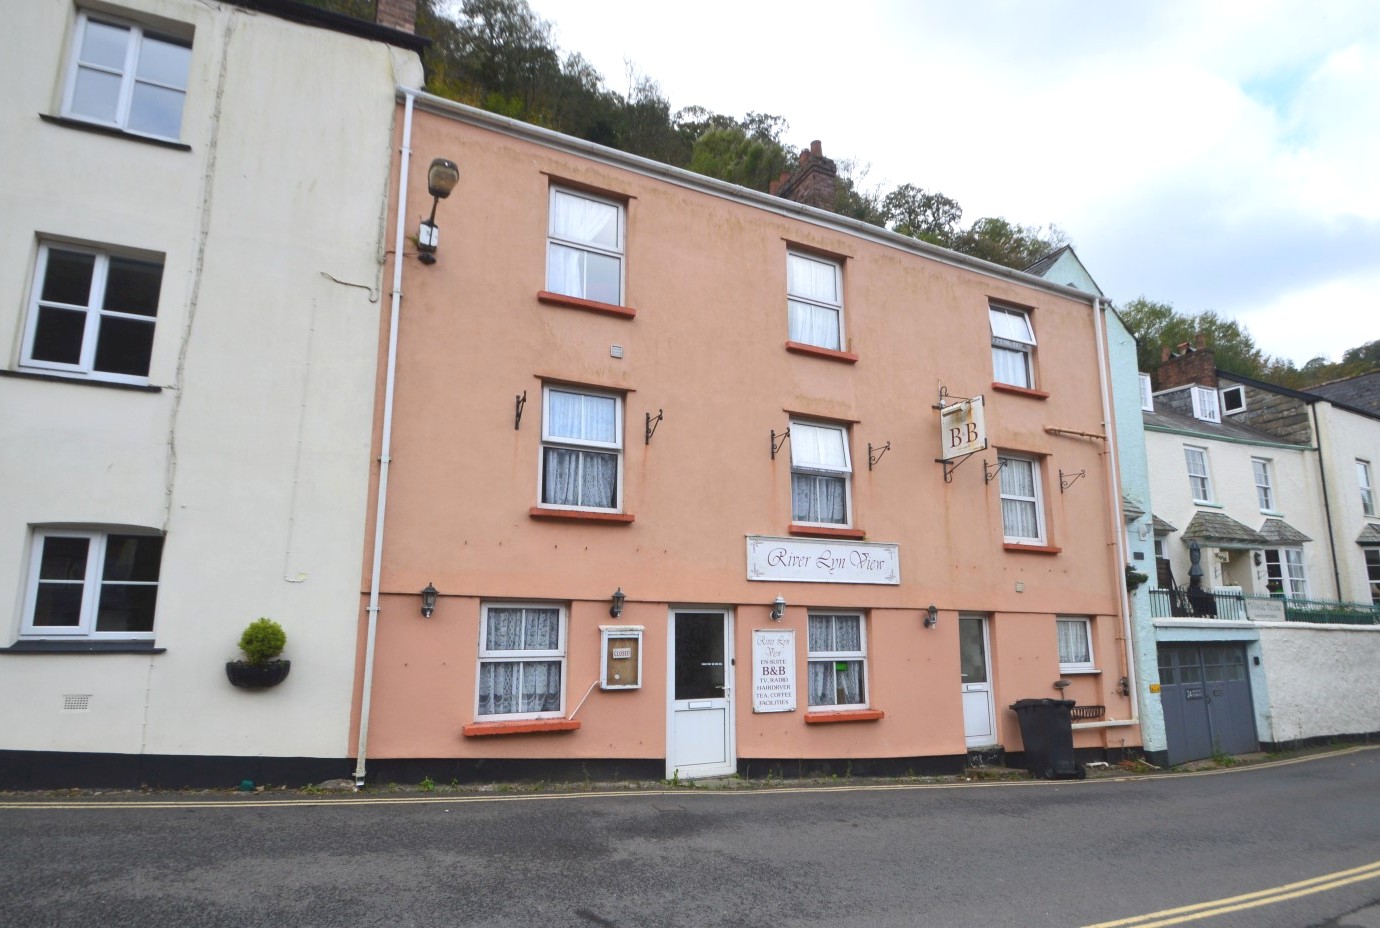 Lynmouth bed and breakfast